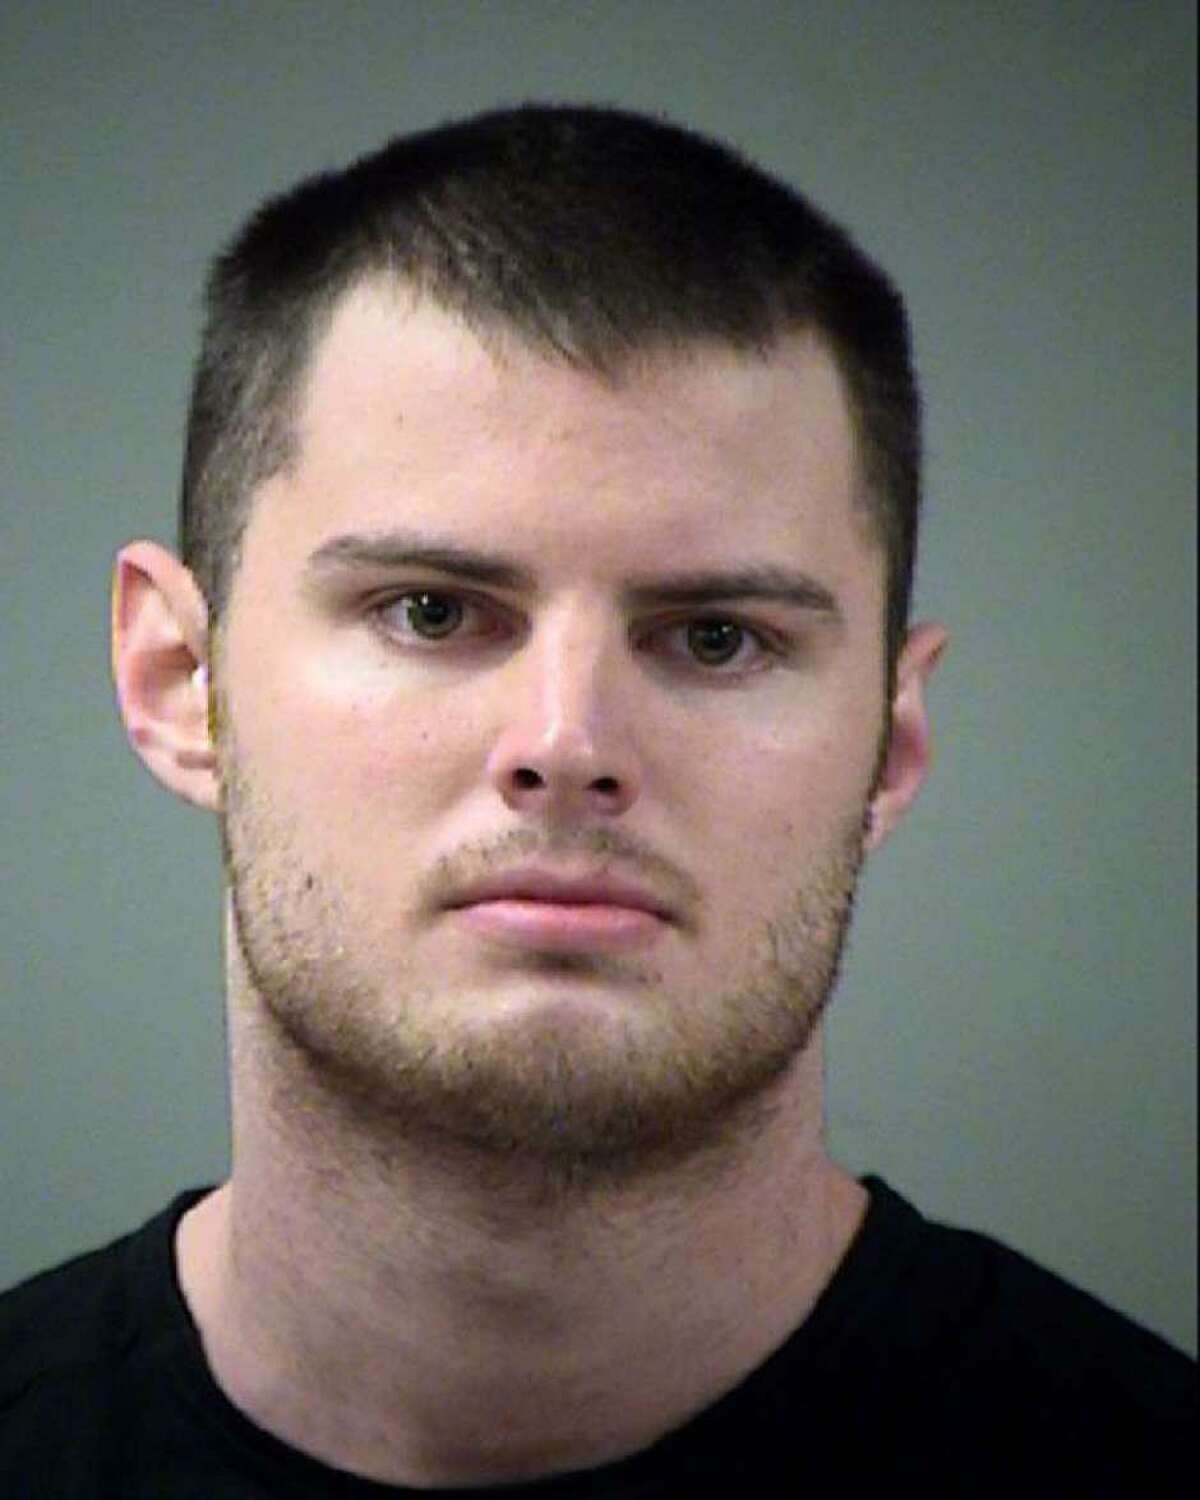 Mark Howerton was charged with murder in connection to the death of Trinity cheerleader Cayley Mandadi.